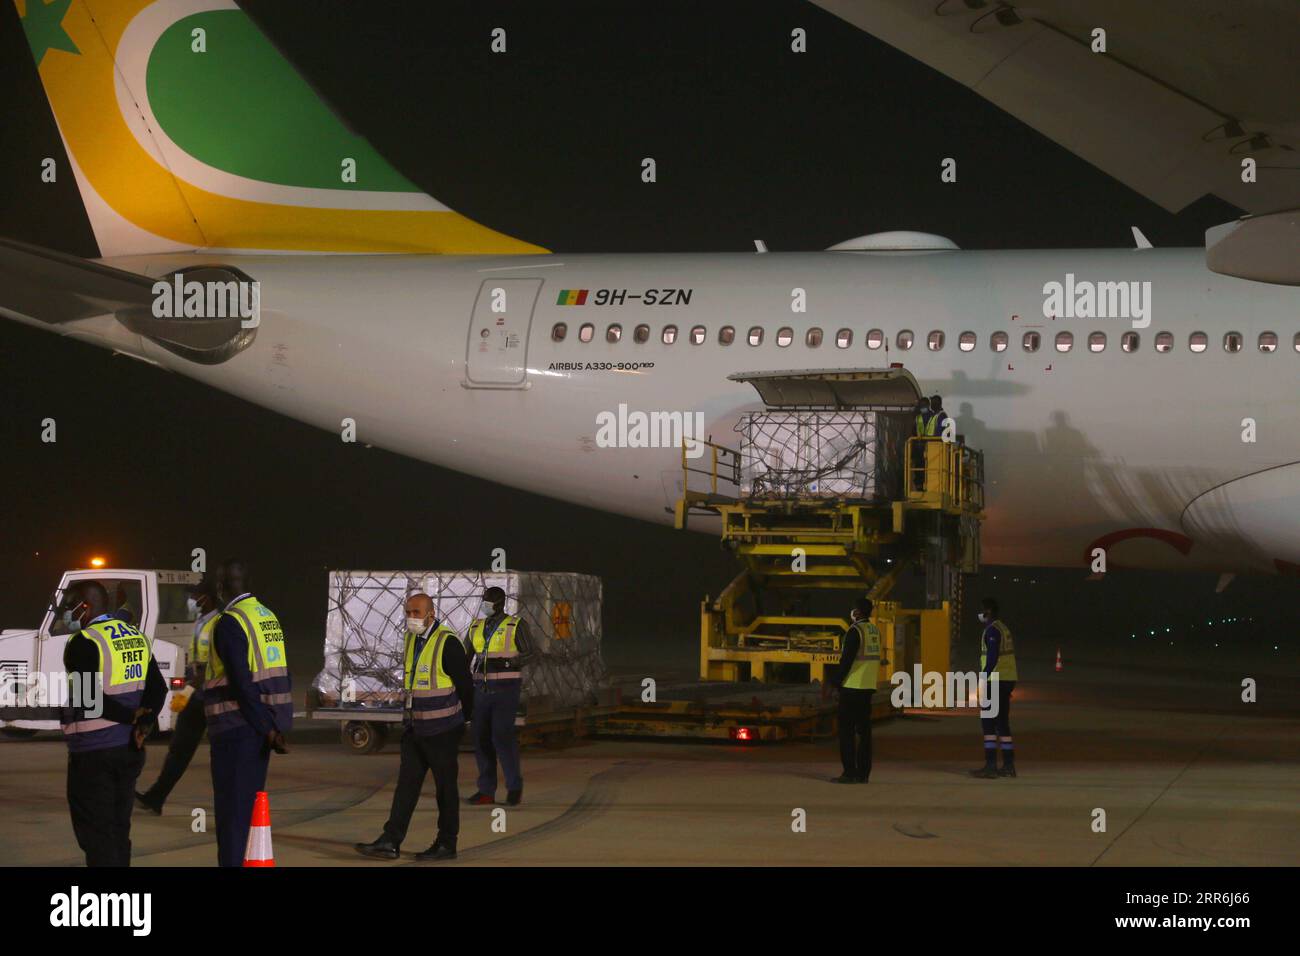 210218 -- DAKAR, Feb. 18, 2021 -- Workers unload the first batch of China s Sinopharm COVID-19 vaccine at Blaise Diagne International Airport in Dakar, Senegal, Feb. 17, 2021. Senegal on Wednesday night received the first batch of China s Sinopharm COVID-19 vaccine.  SENEGAL-DAKAR-CHINESE COVID-19 VACCINE-ARRIVAL XingxJianqiao PUBLICATIONxNOTxINxCHN Stock Photo